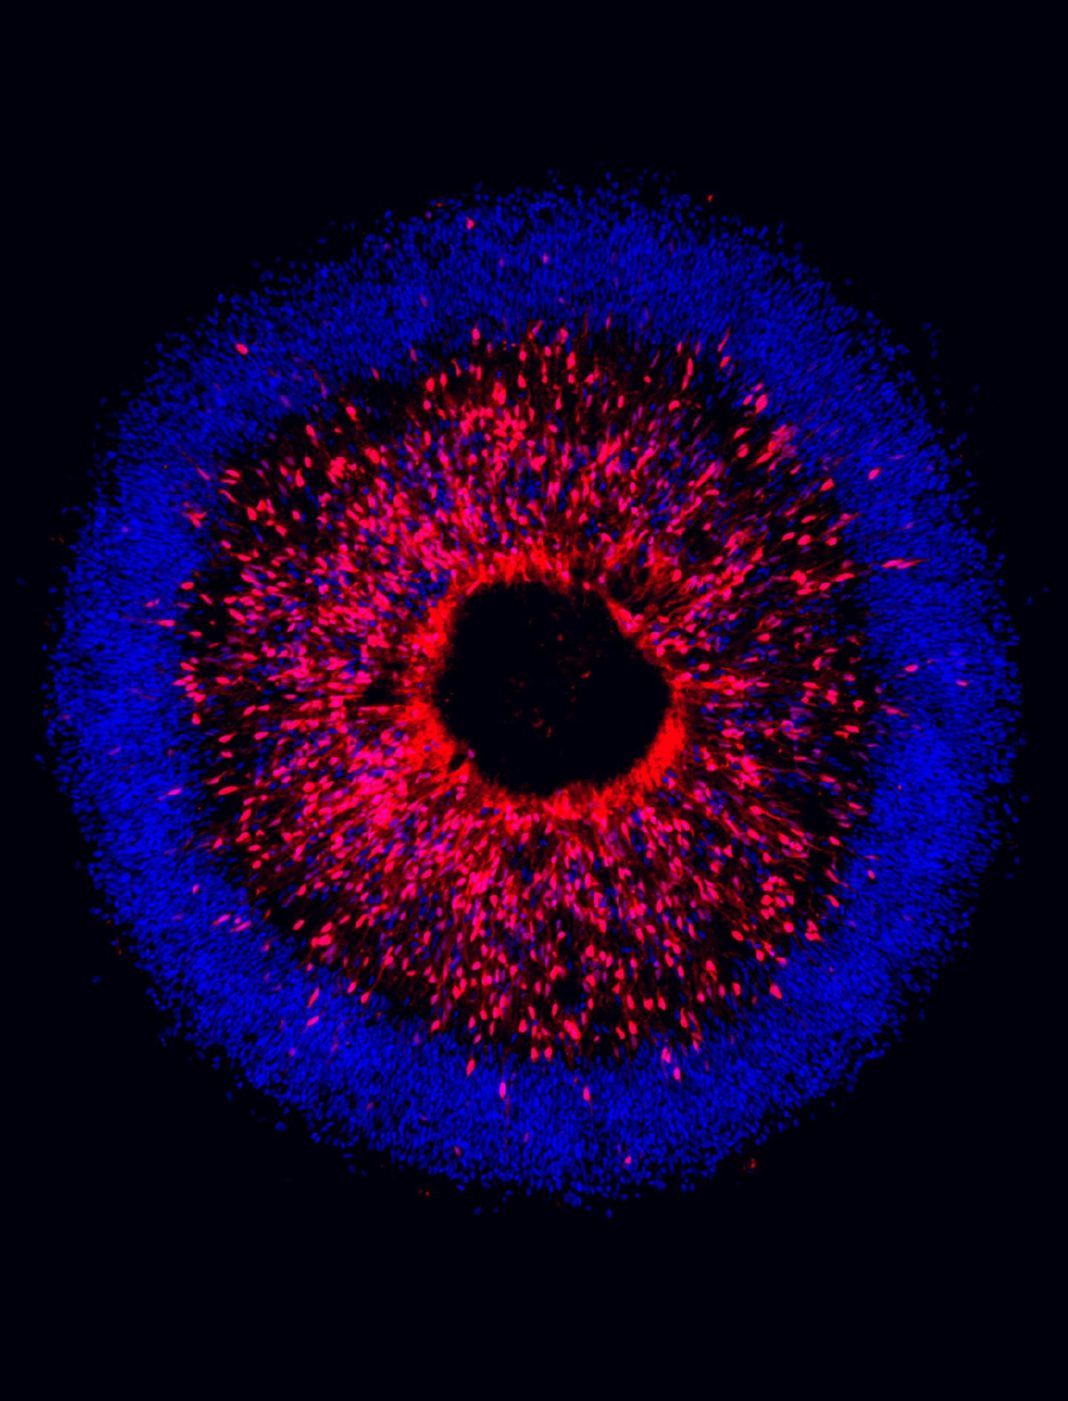 Stem cell model used to study degeneration in glaucoma